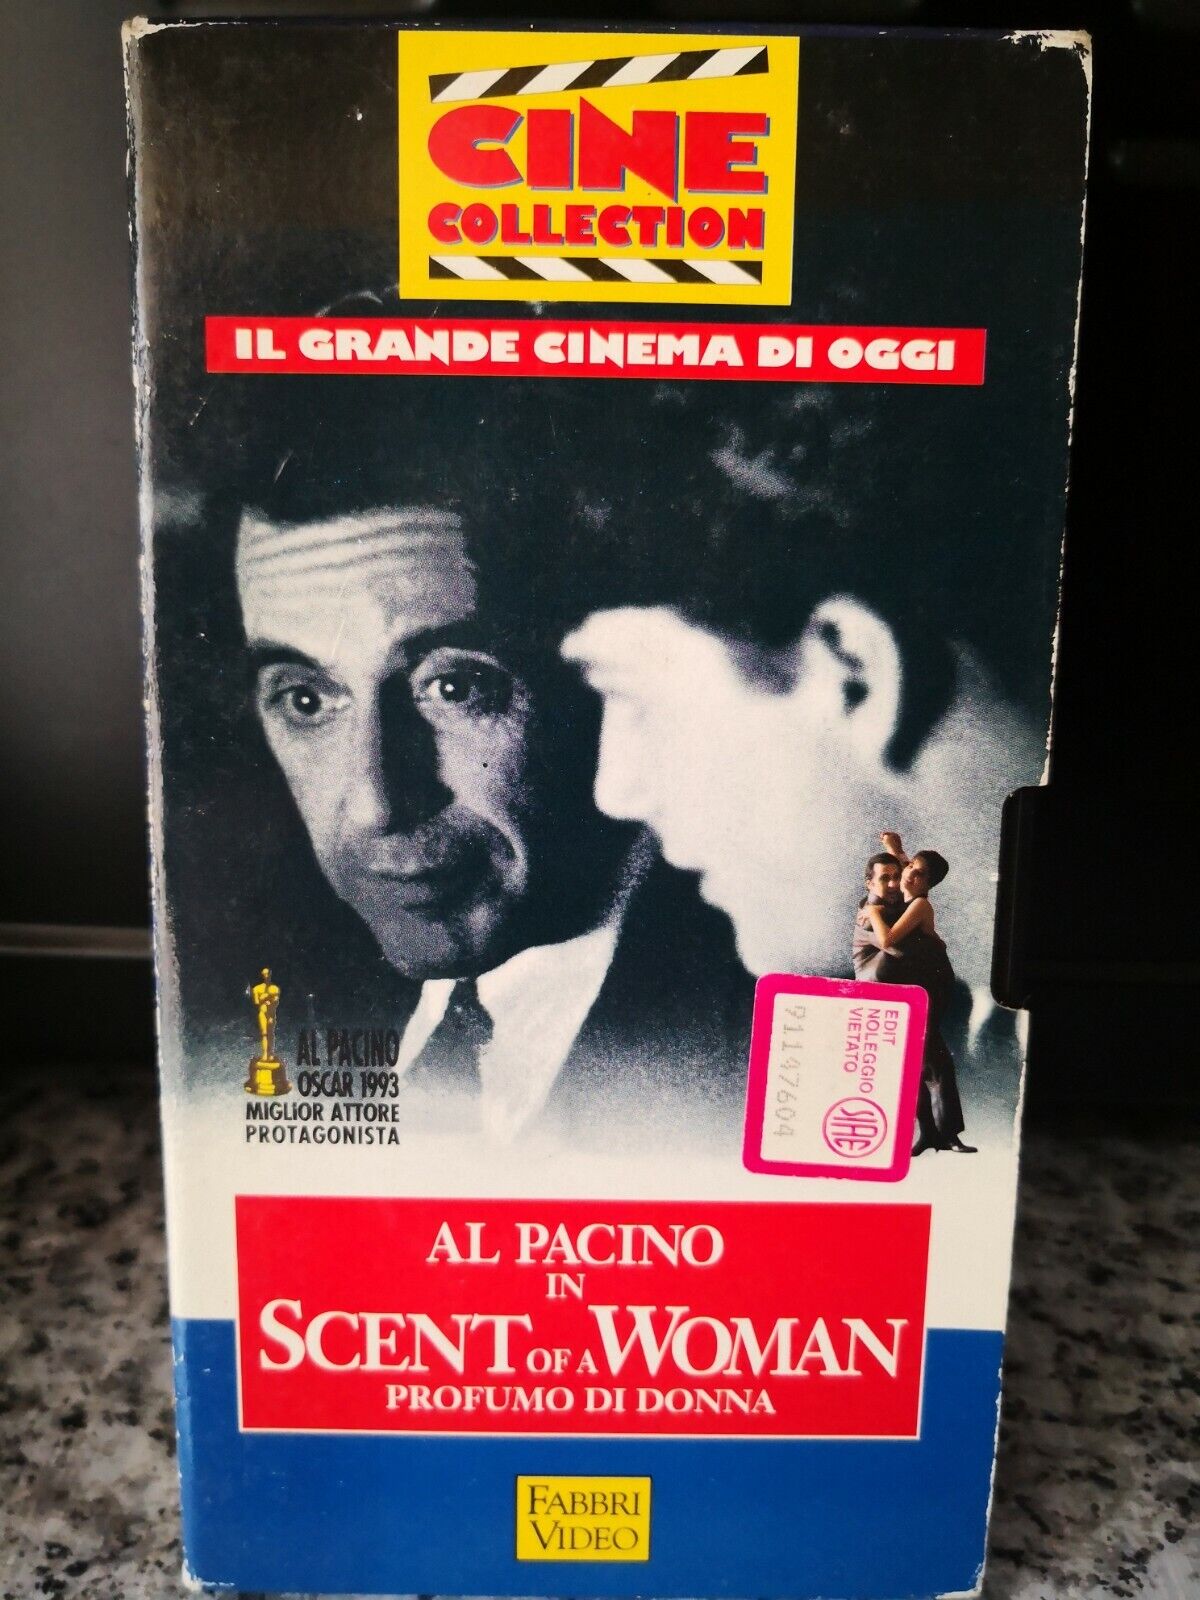 Al Pacino in Scent of a Woman - Vhs - 1994- CineCollection- F